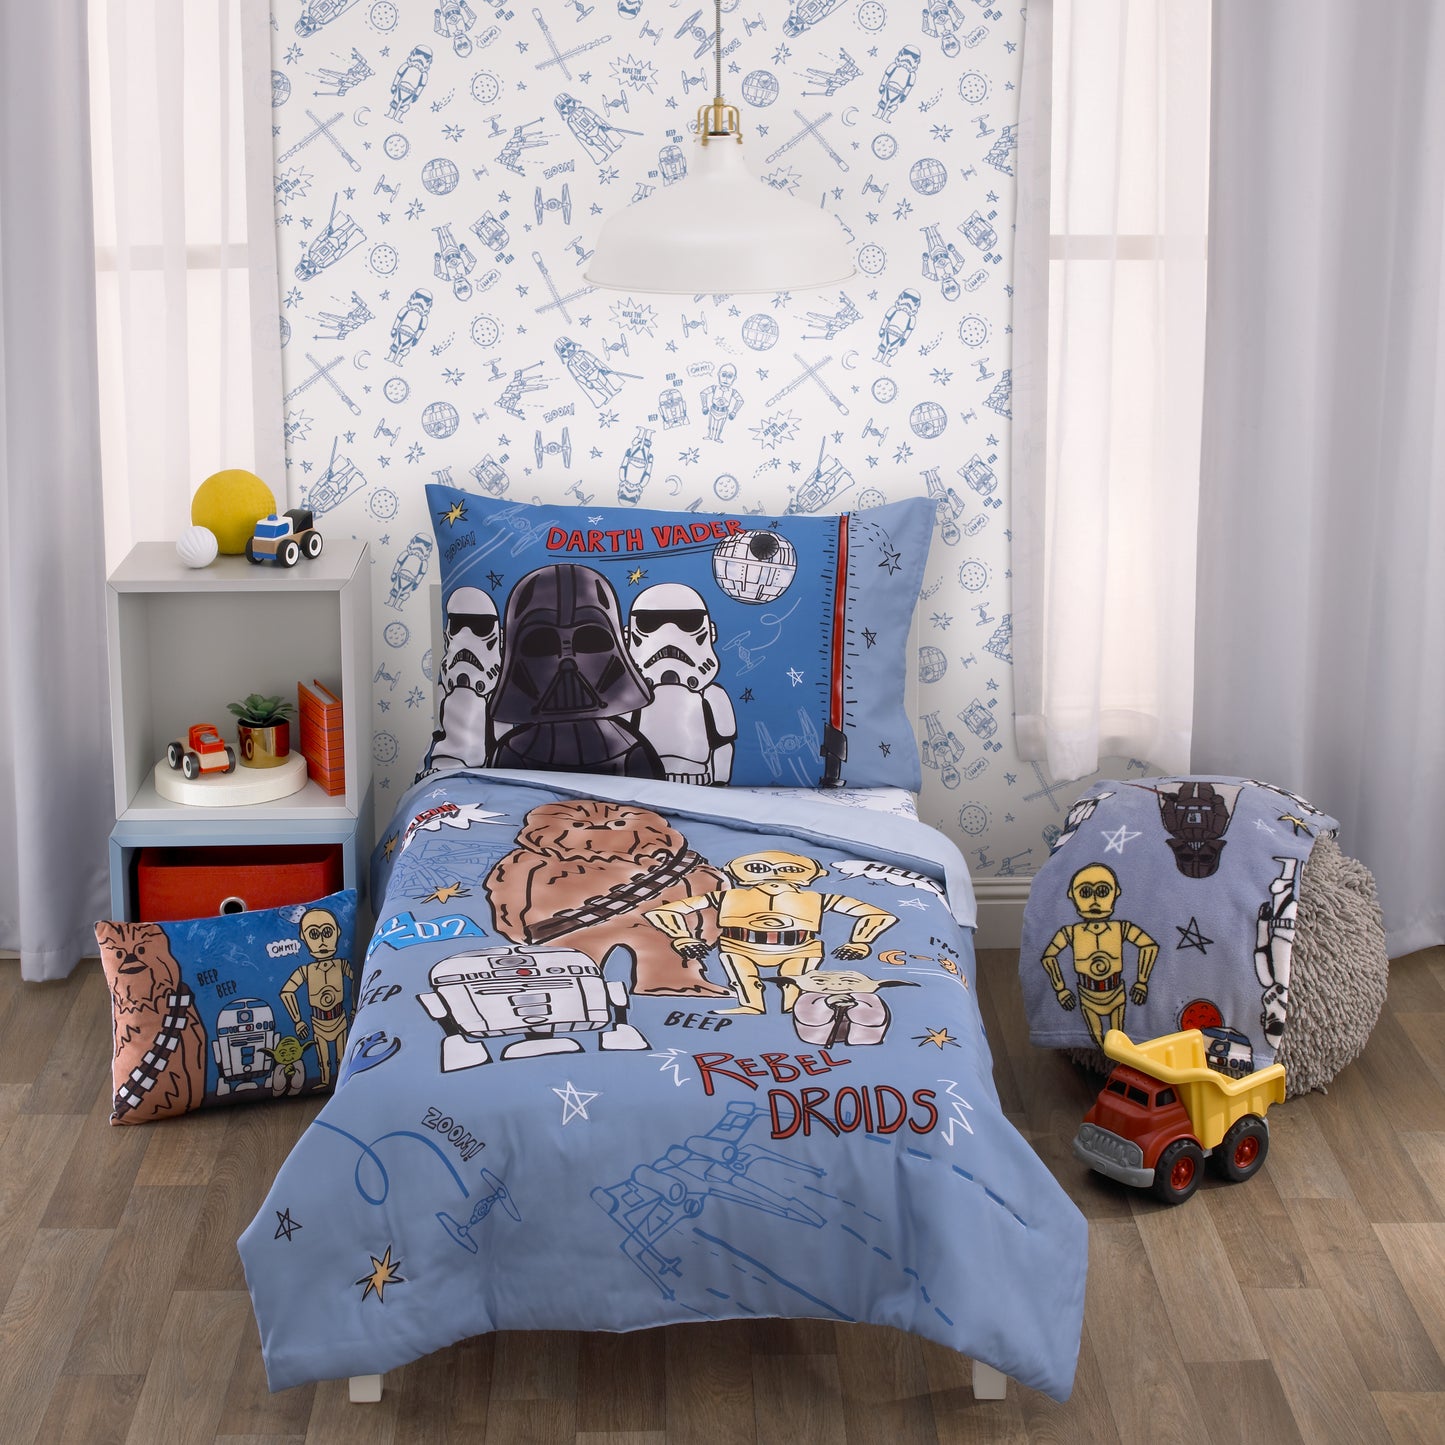 Star Wars Rule the Galaxy Blue, Grey, White 4 Piece Toddler Bed Set - Comforter, Fitted Bottom Sheet, Flat Top Sheet, Reversible Pillowcase